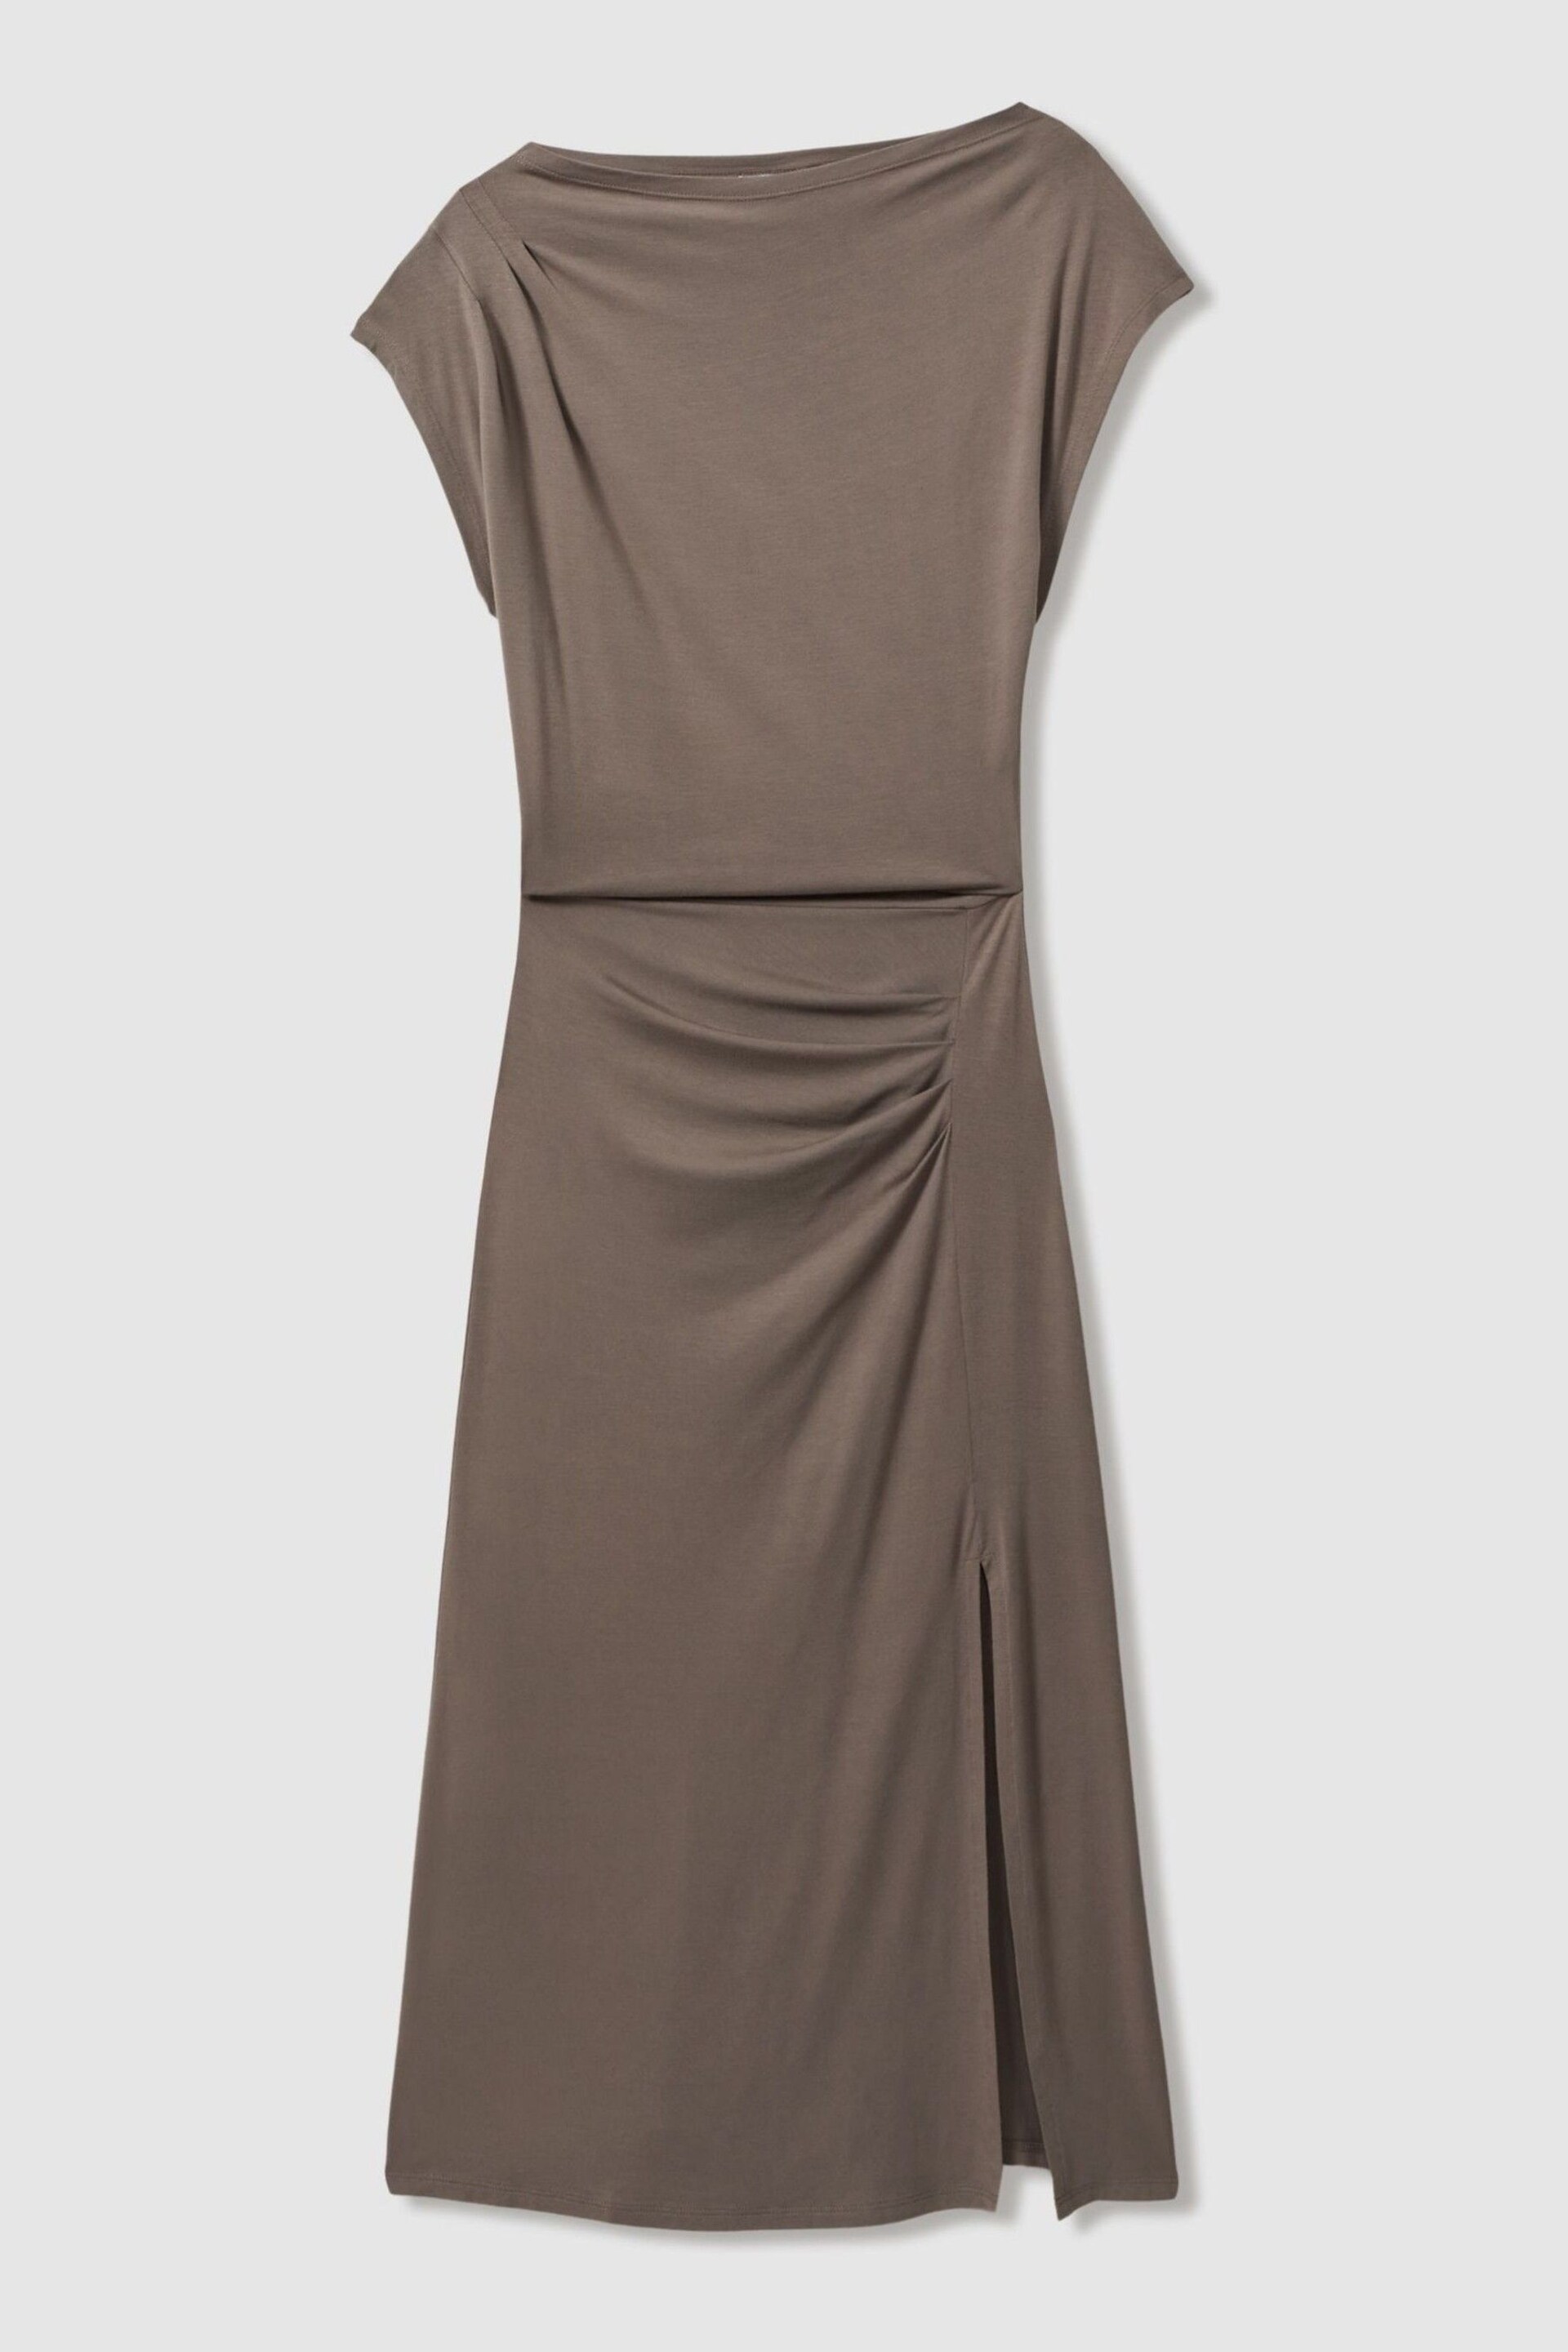 Reiss Mocha Leonore Ruched Jersey Midi Dress - Image 2 of 6